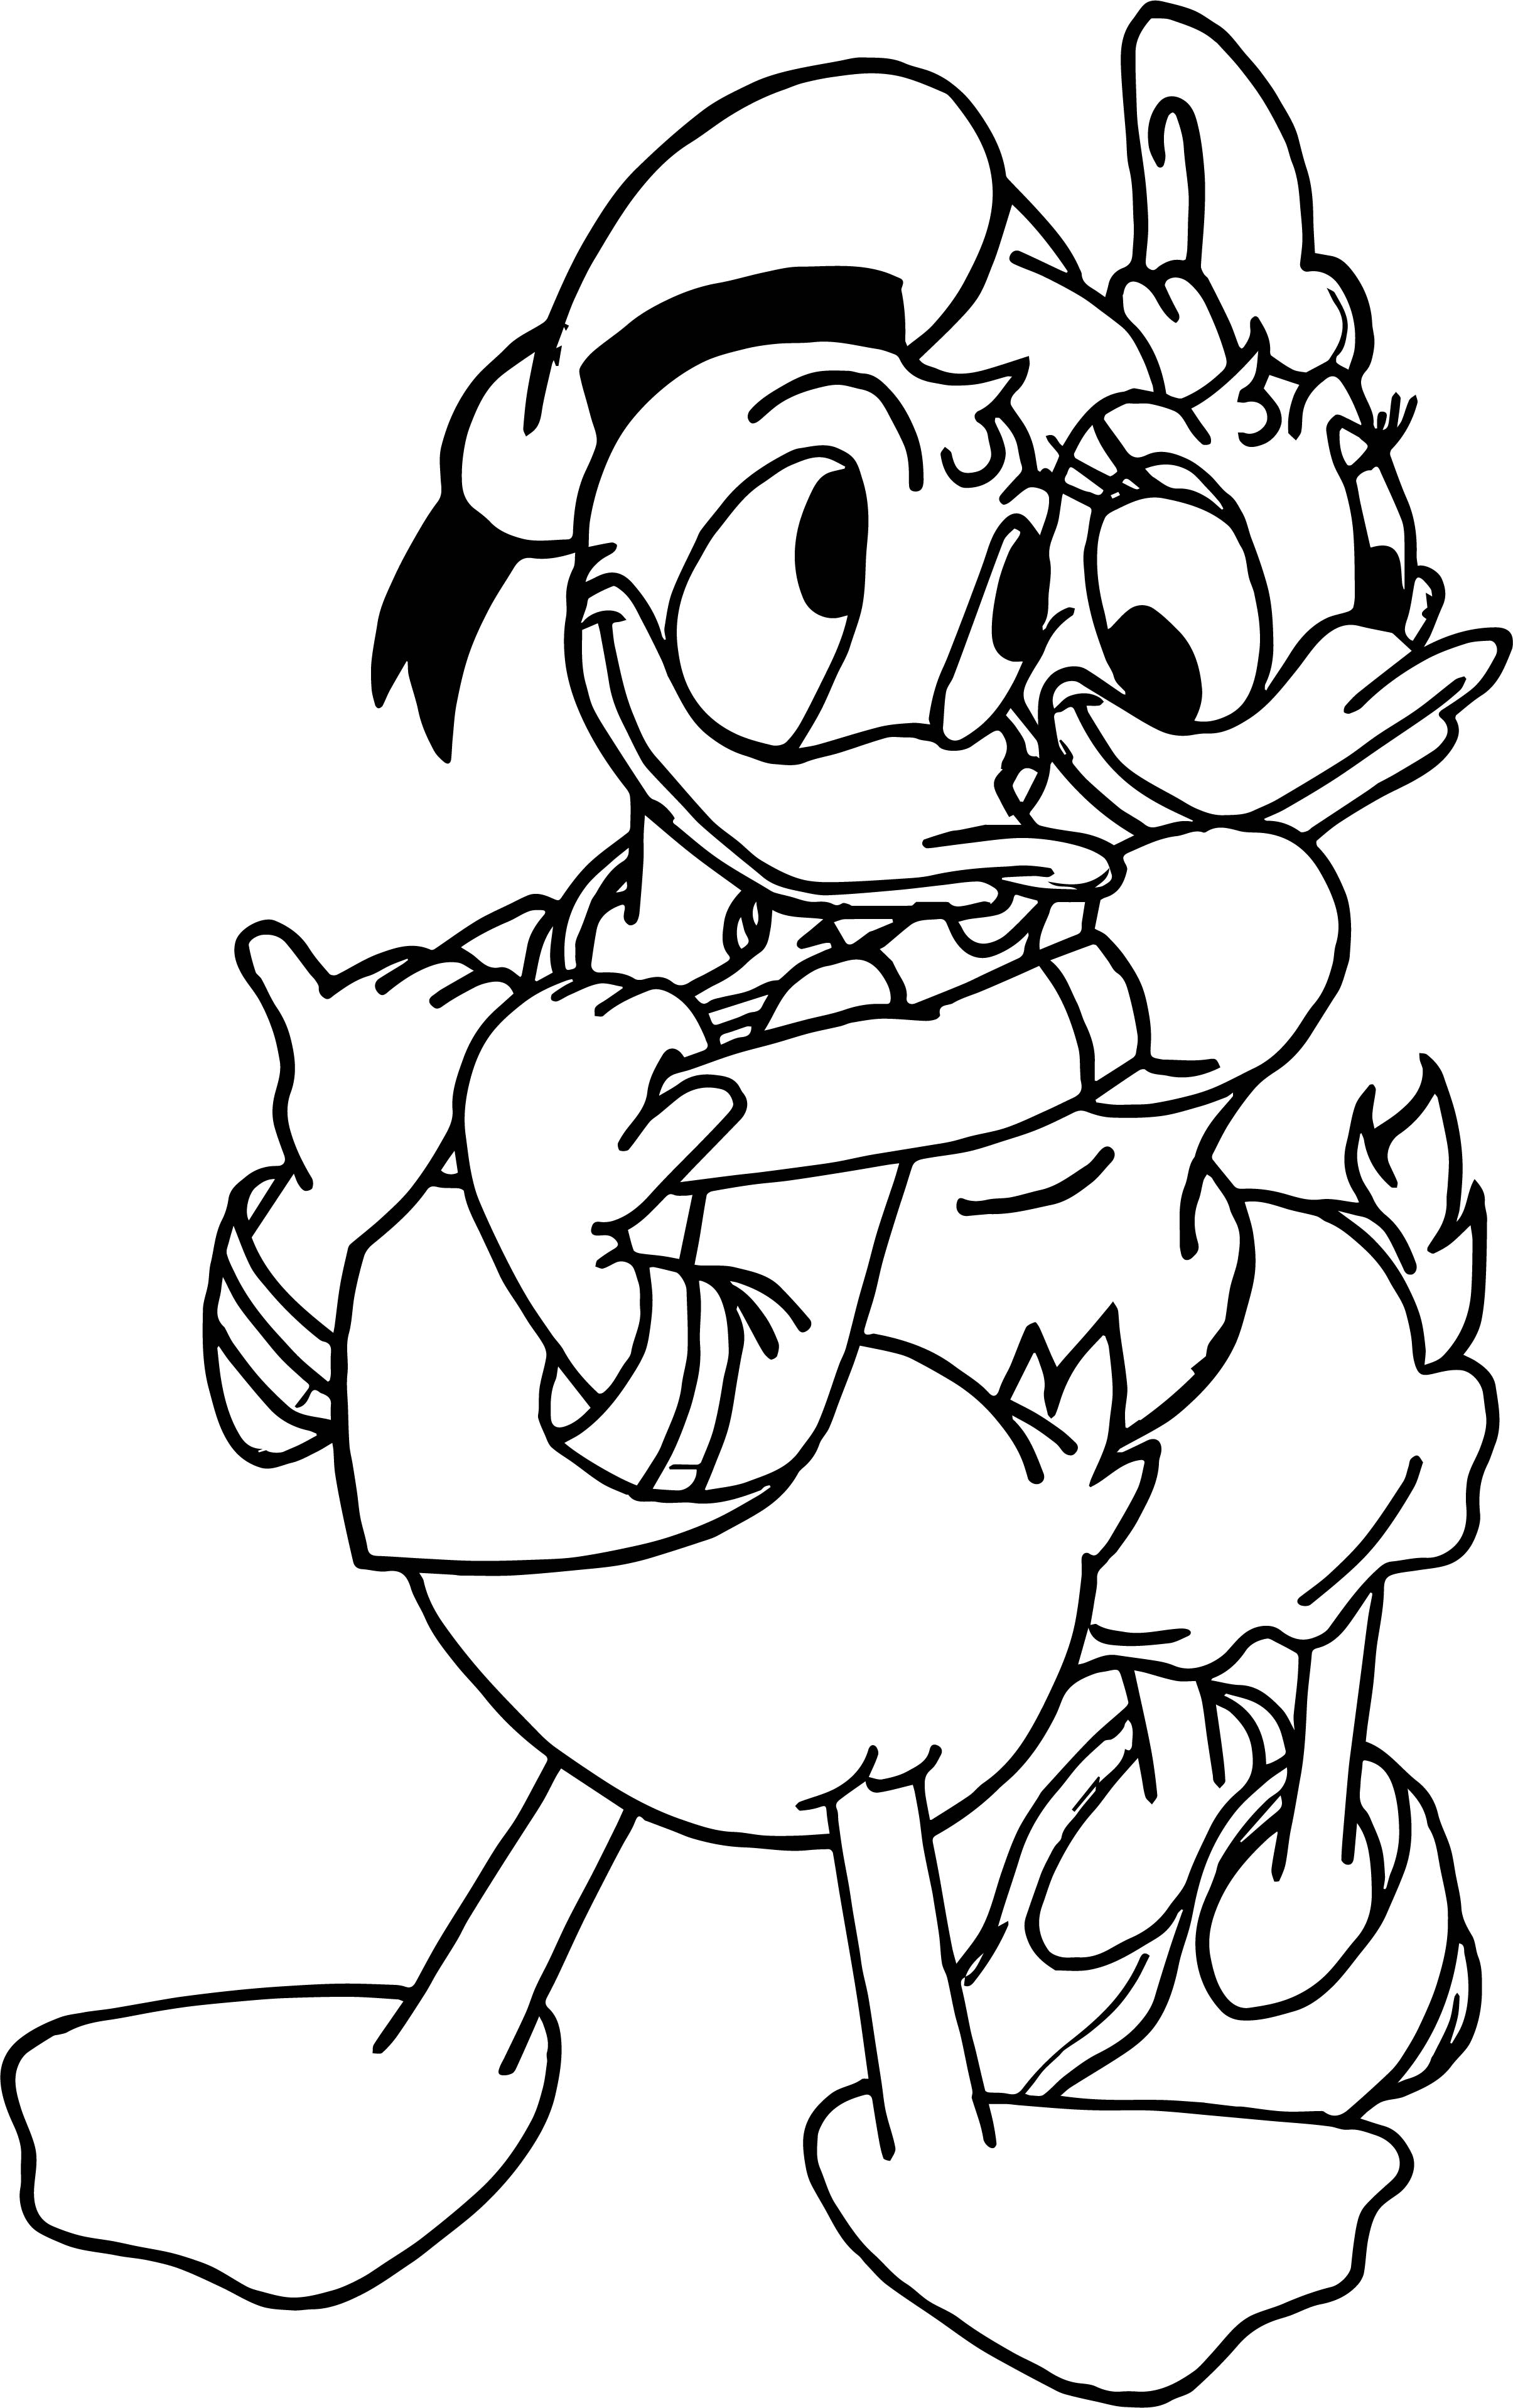 Donald And Daisy Duck Coloring Pages At GetColorings Free 